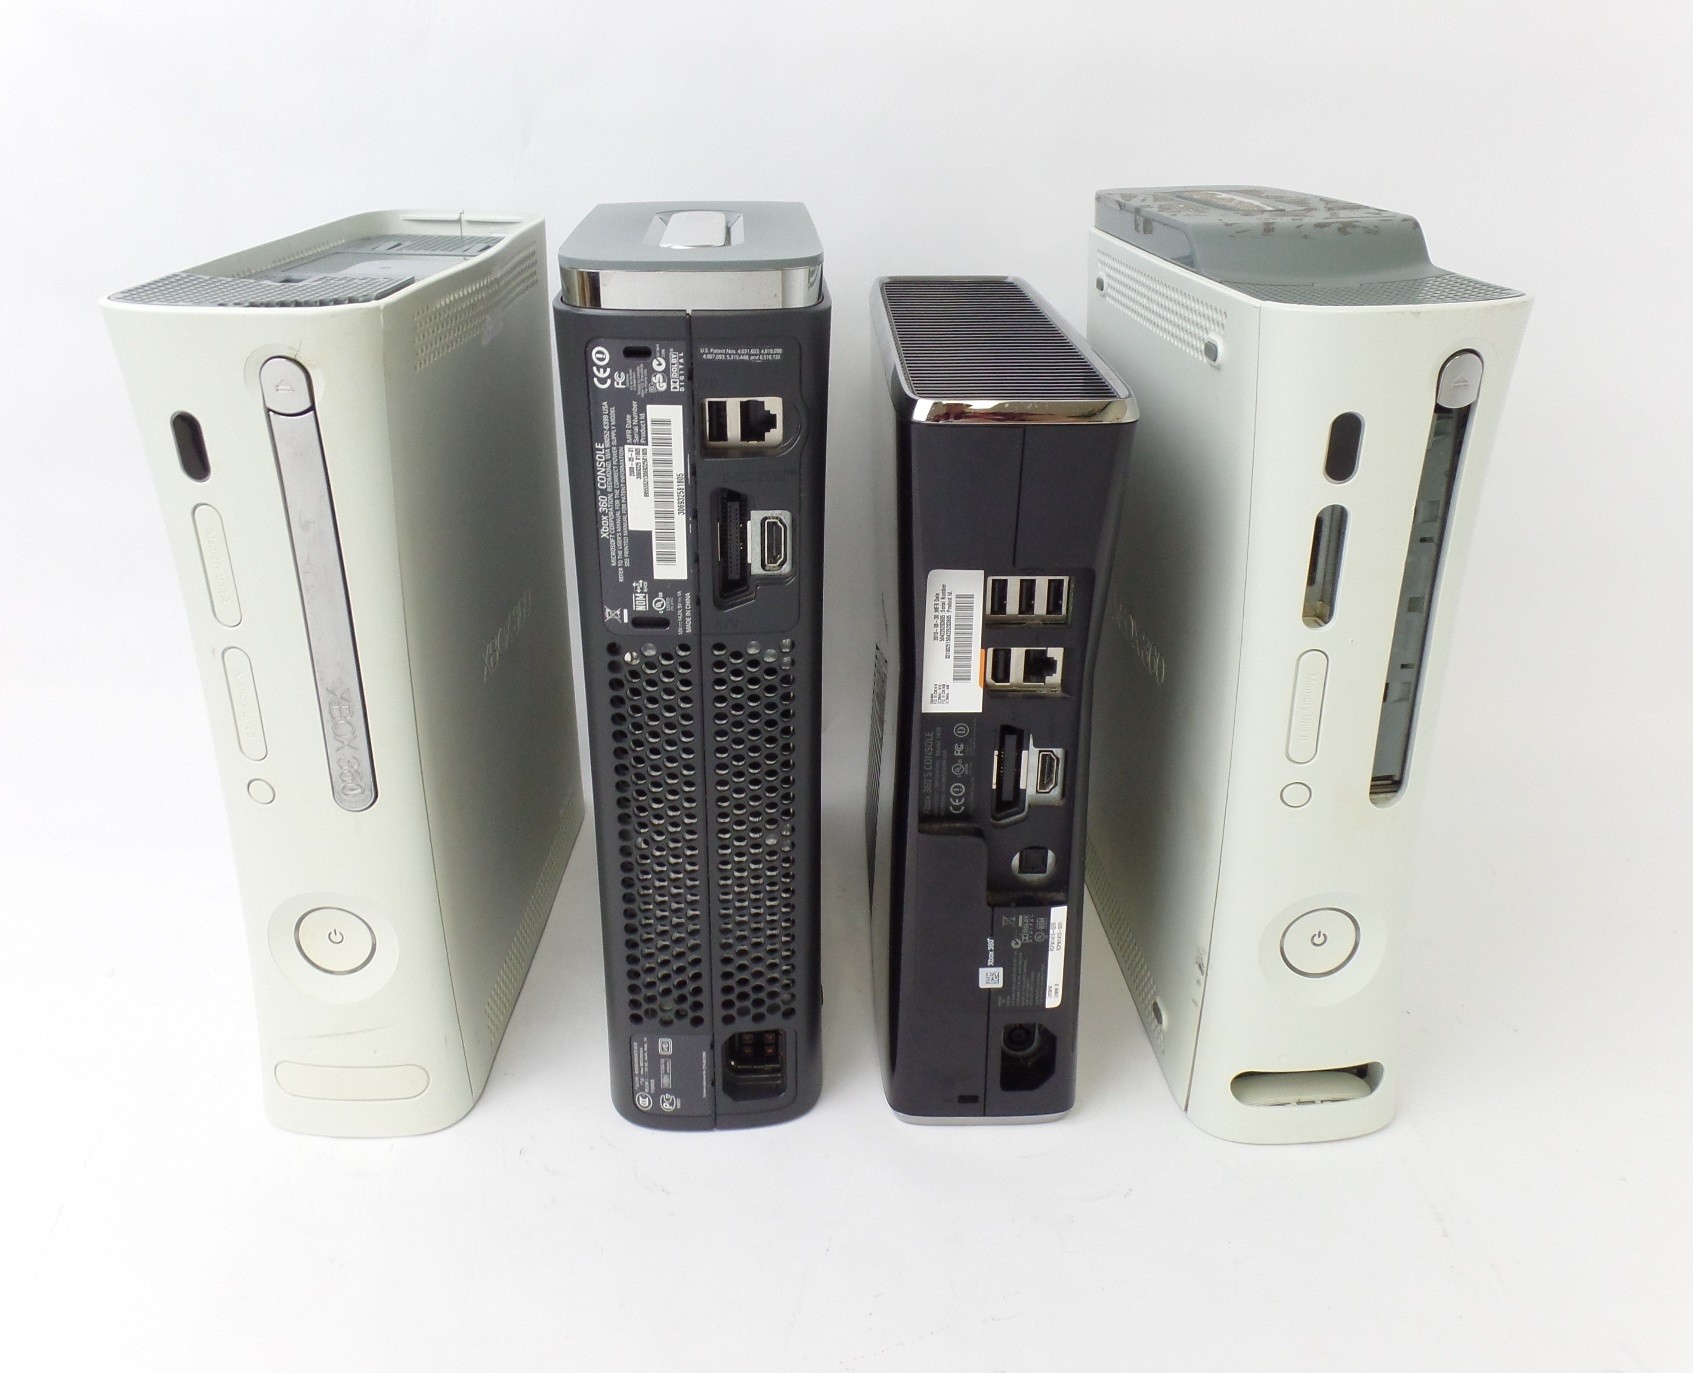 Read: defective Lot of 4 Xbox 360 S Console #2